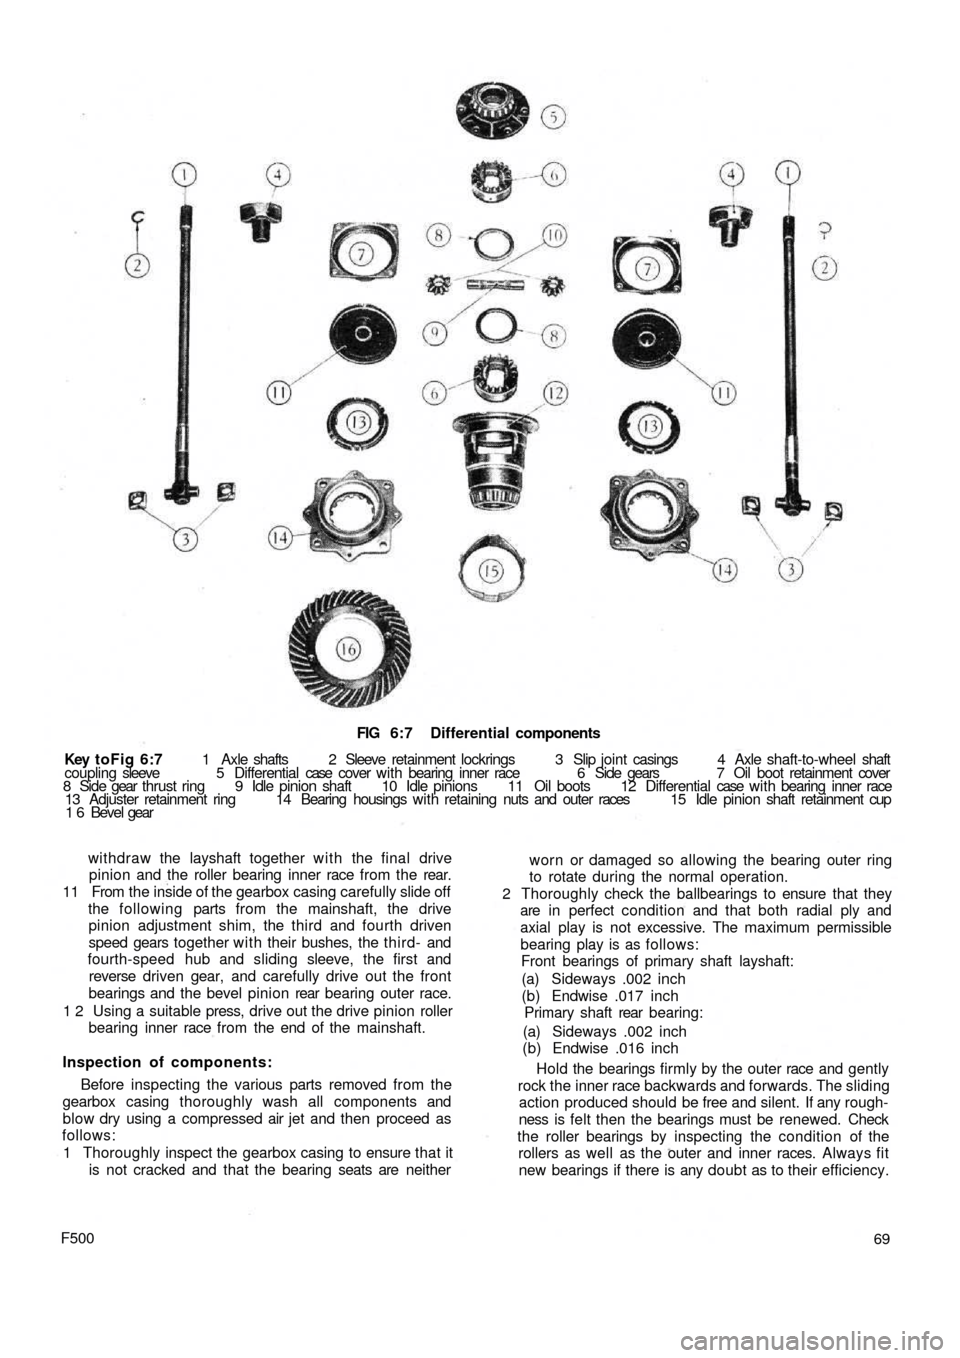 FIAT 500 1969 1.G Repair Manual FIG 6:7  Differential components
Key toFig  6:7 1  Axle  shafts  2  Sleeve  retainment  lockrings   3   Slip  joint casings  4  Axle  shaft-to-wheel shaft
coupling sleeve  5  Differential case  cover 